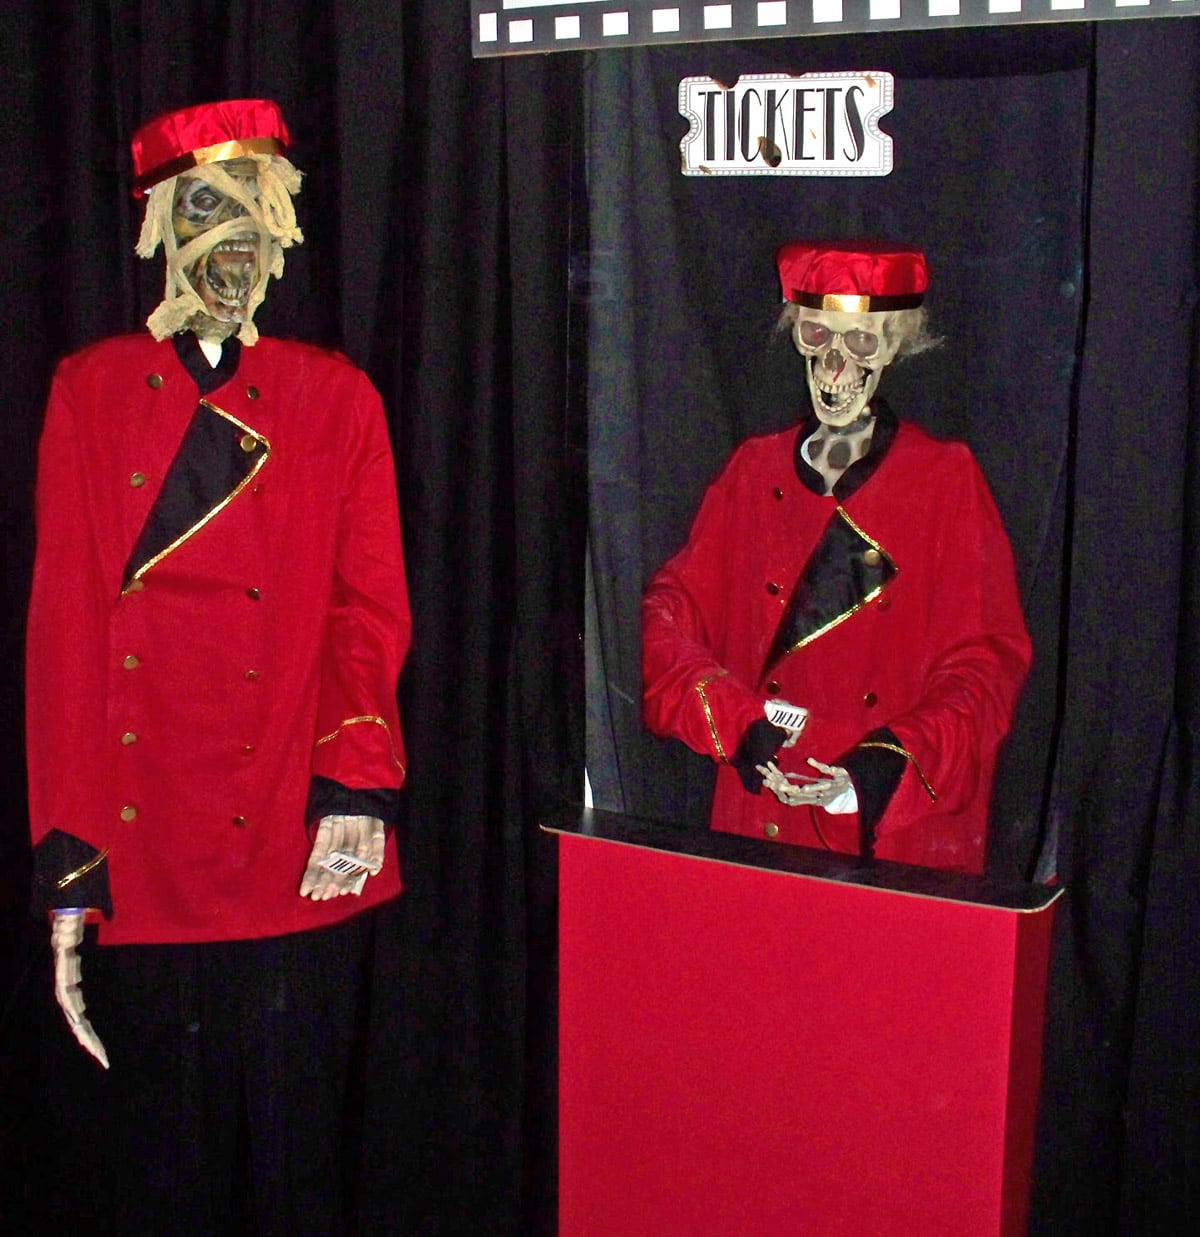 zombie movie theater usher and ticket taker.